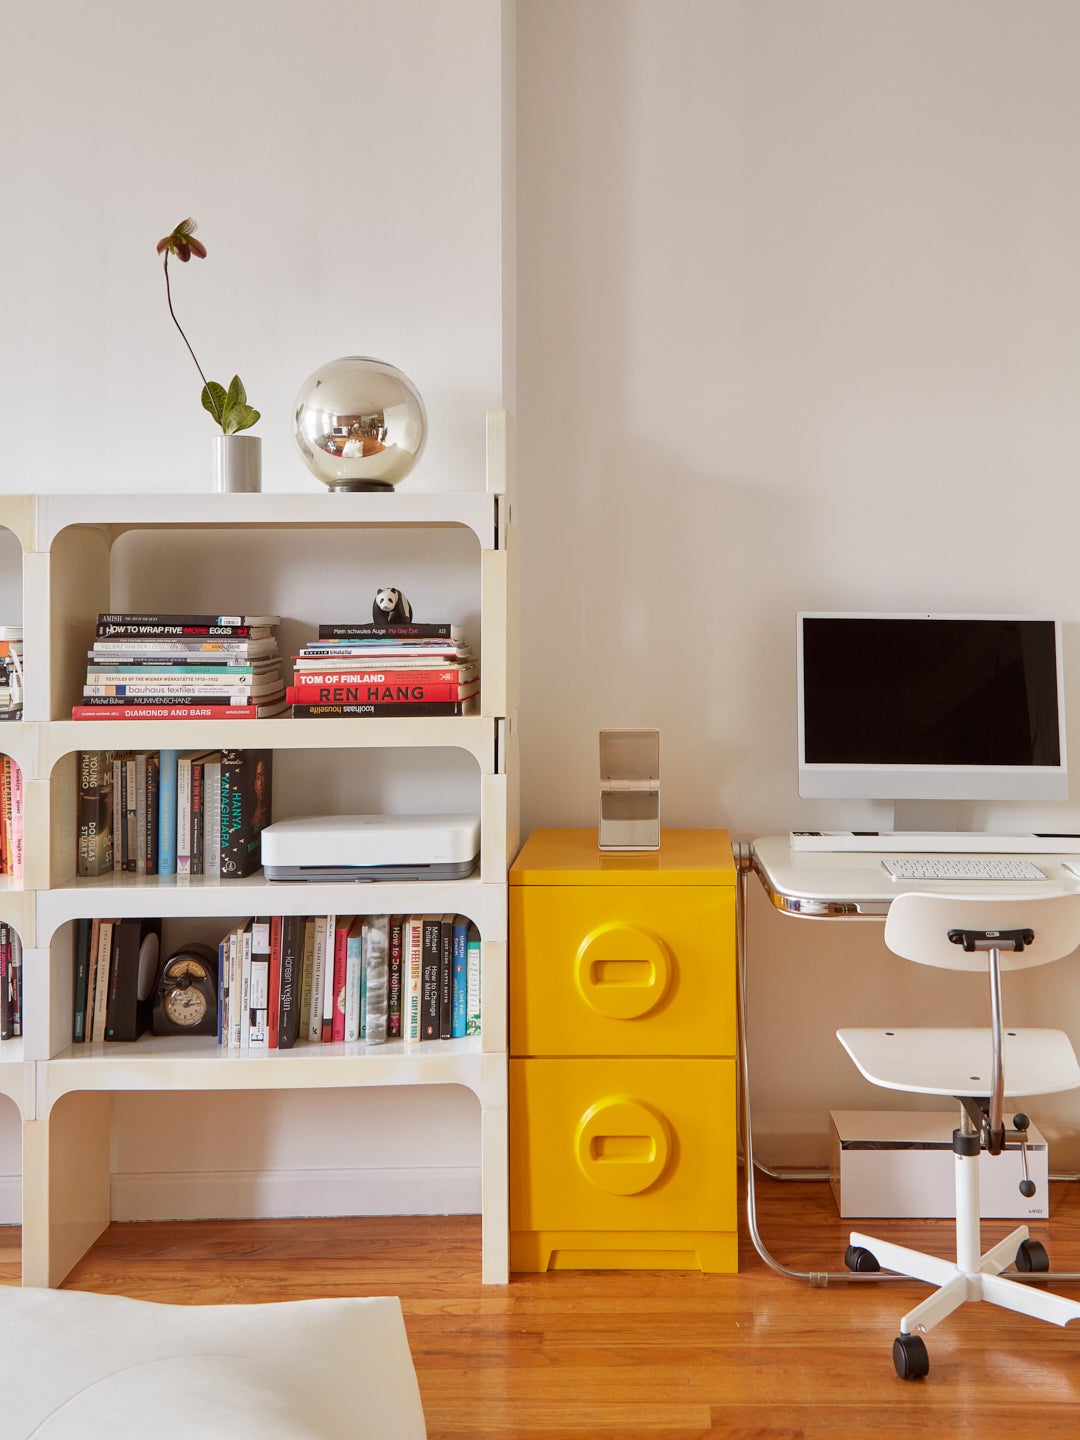 Studio apartment with yellow file cabinets